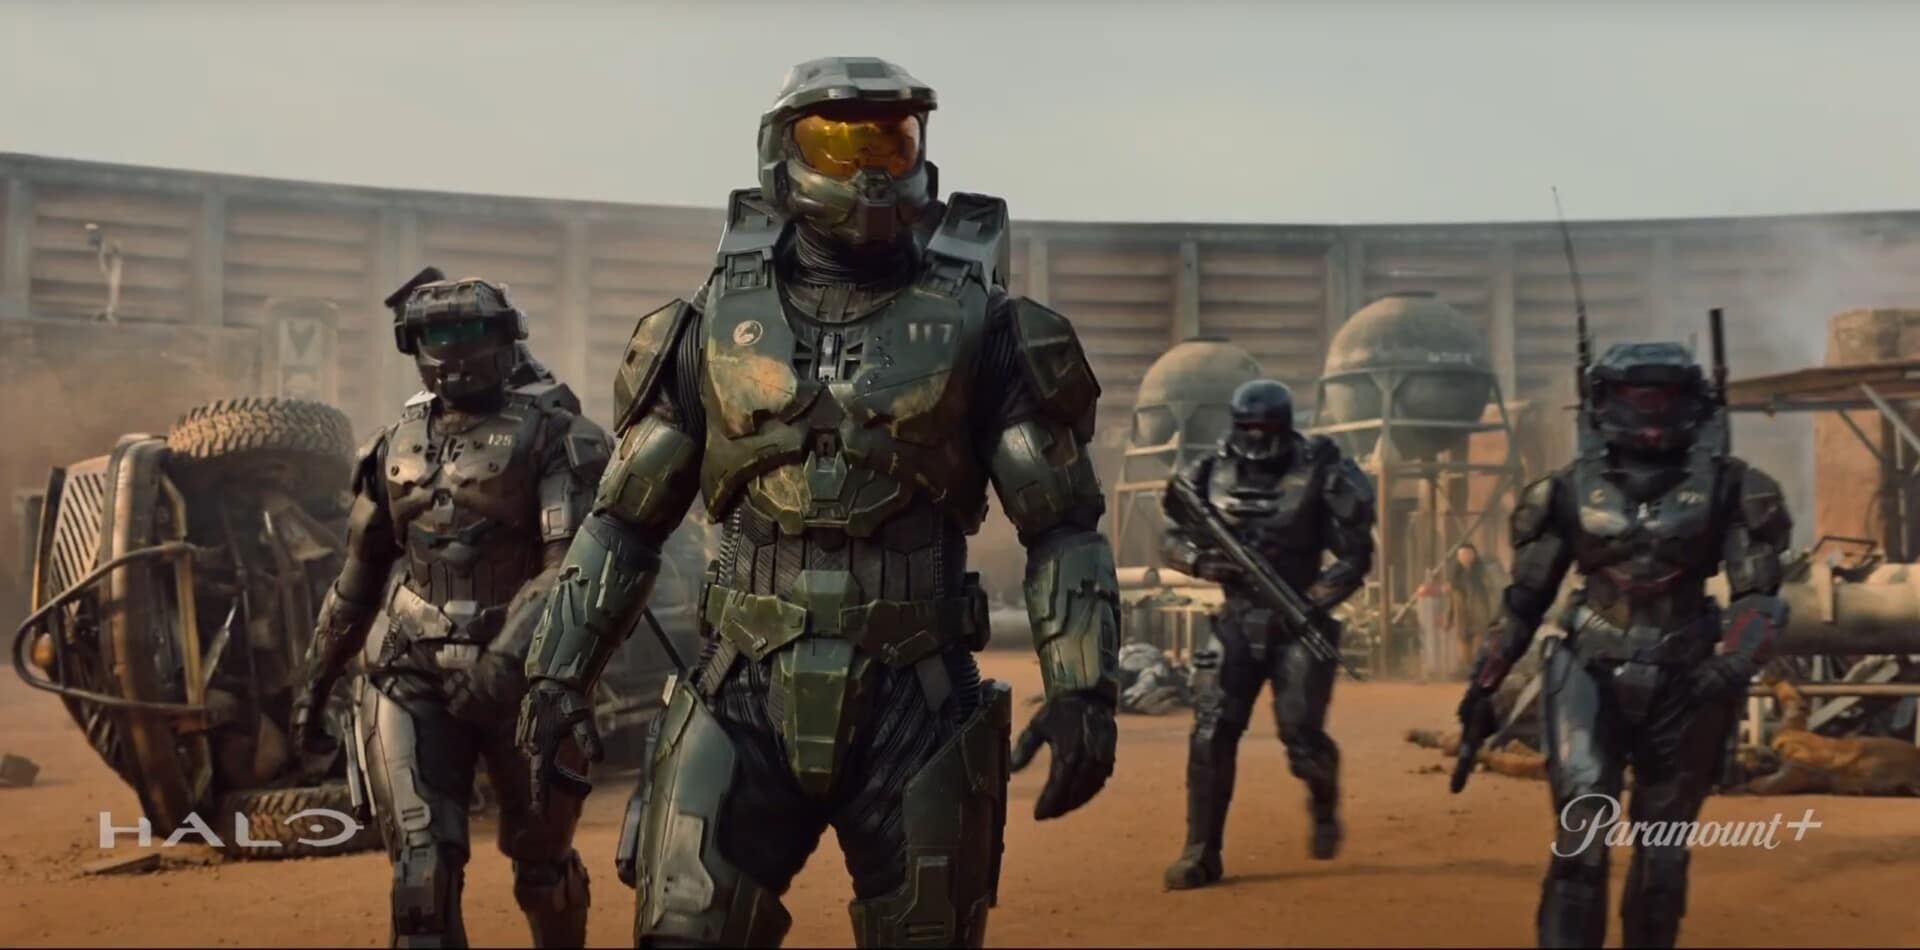 Halo TV Series Set To Premiere On Paramount Plus In 2022